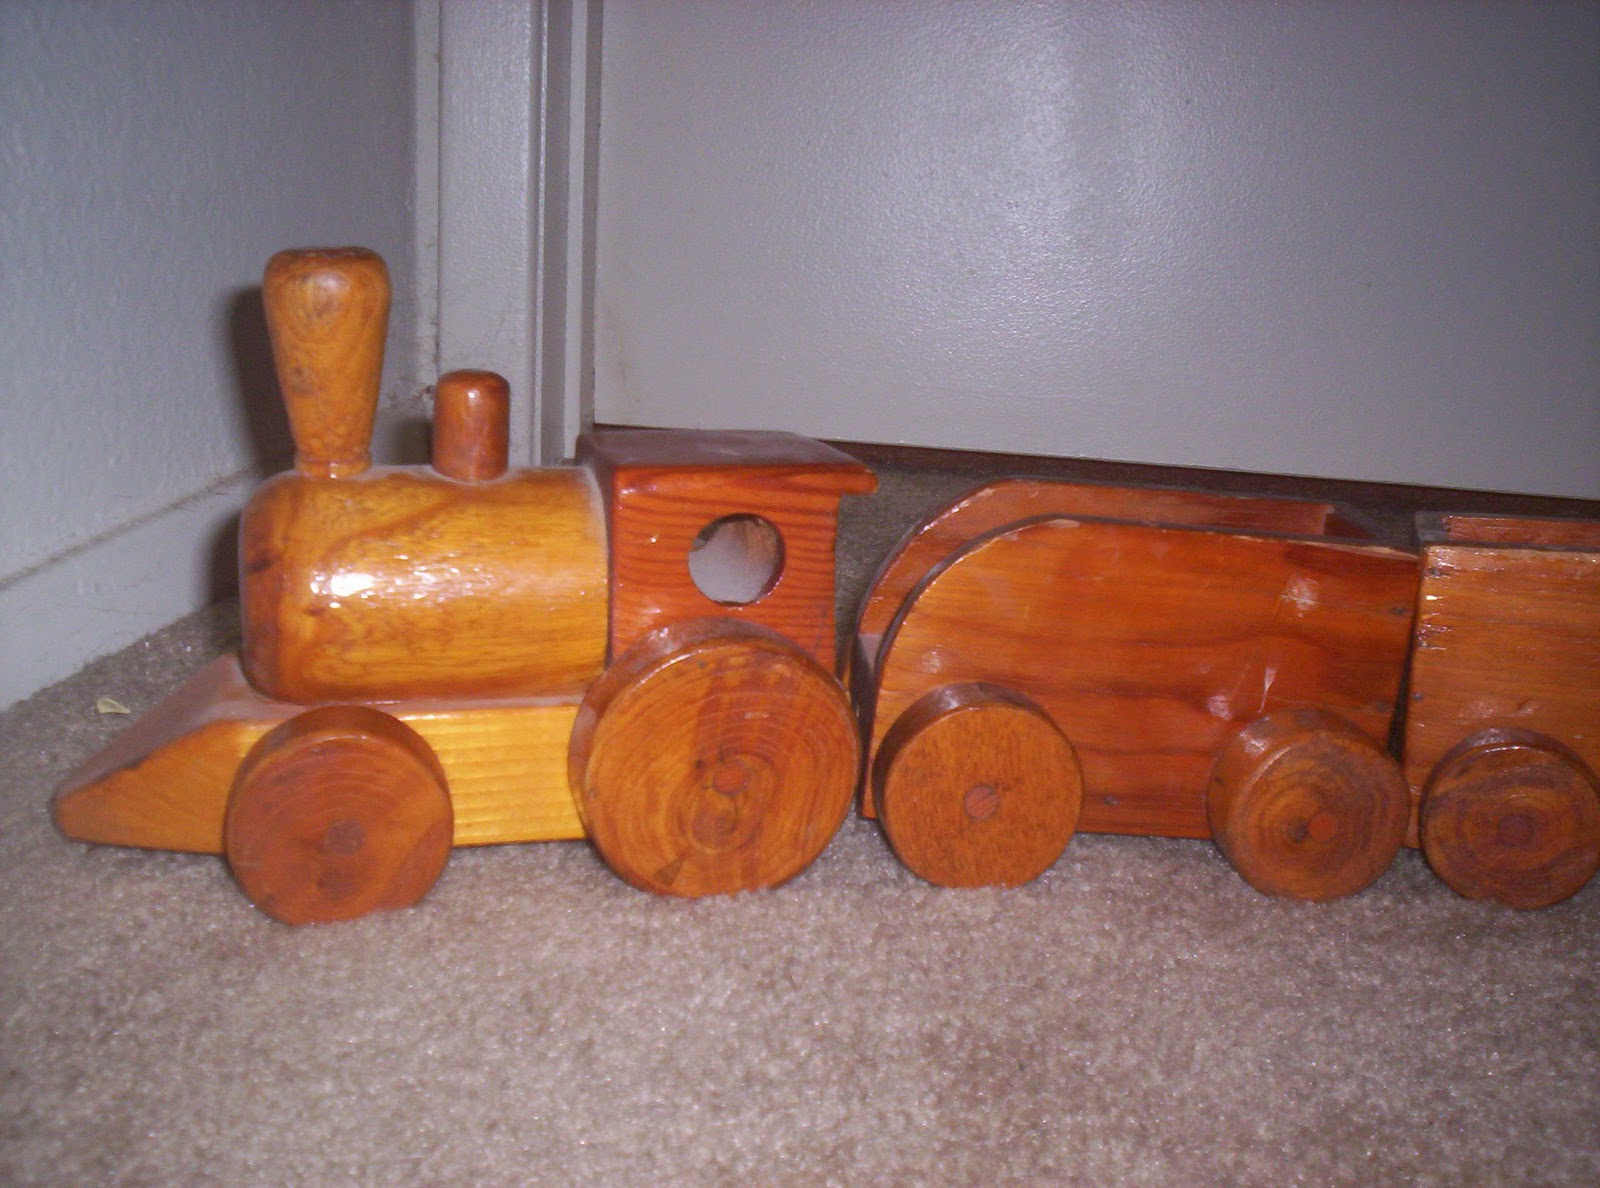 Woodworking Projects For Kids photos